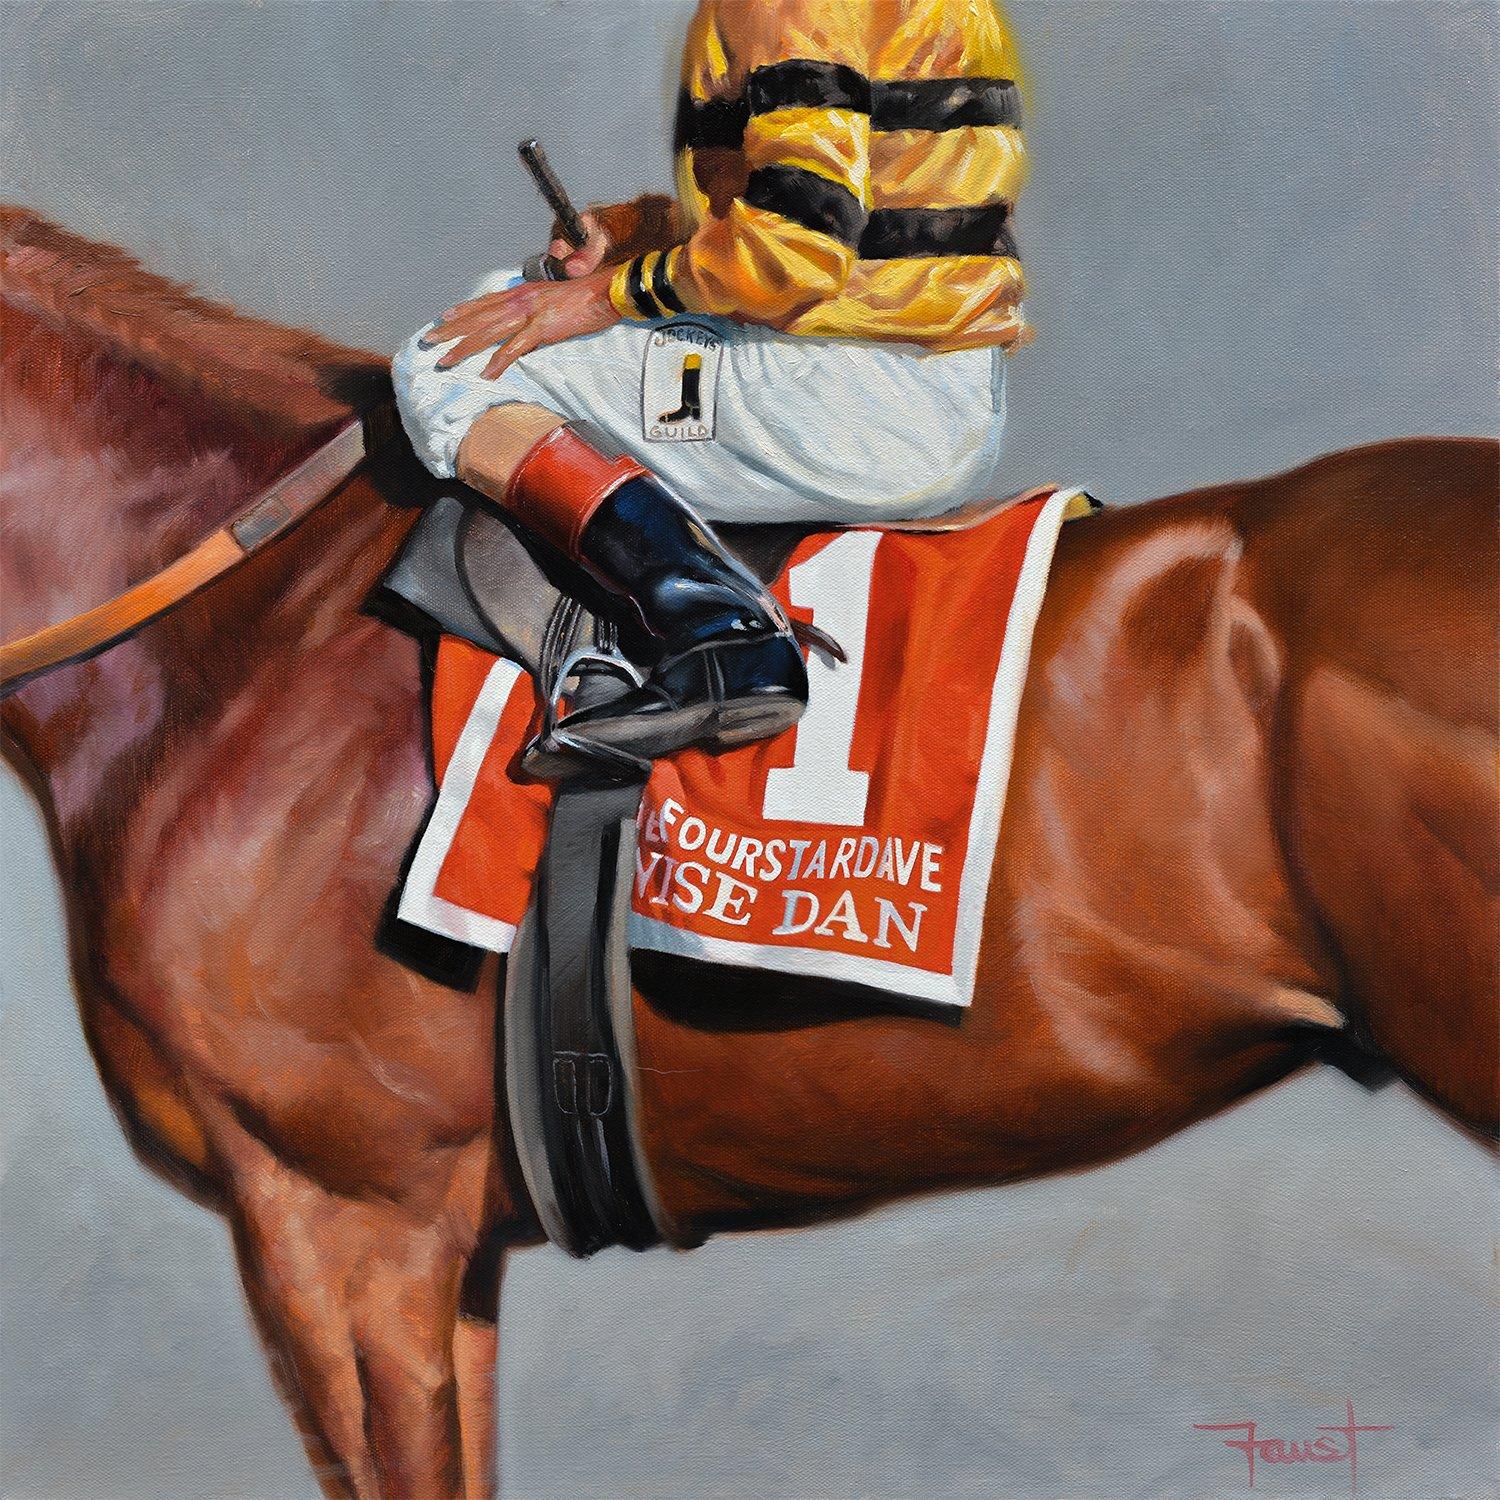 Shawn Faust, "Wise Dan" 24x24 Horse and Jockey Velazquez Equine Oil Painting